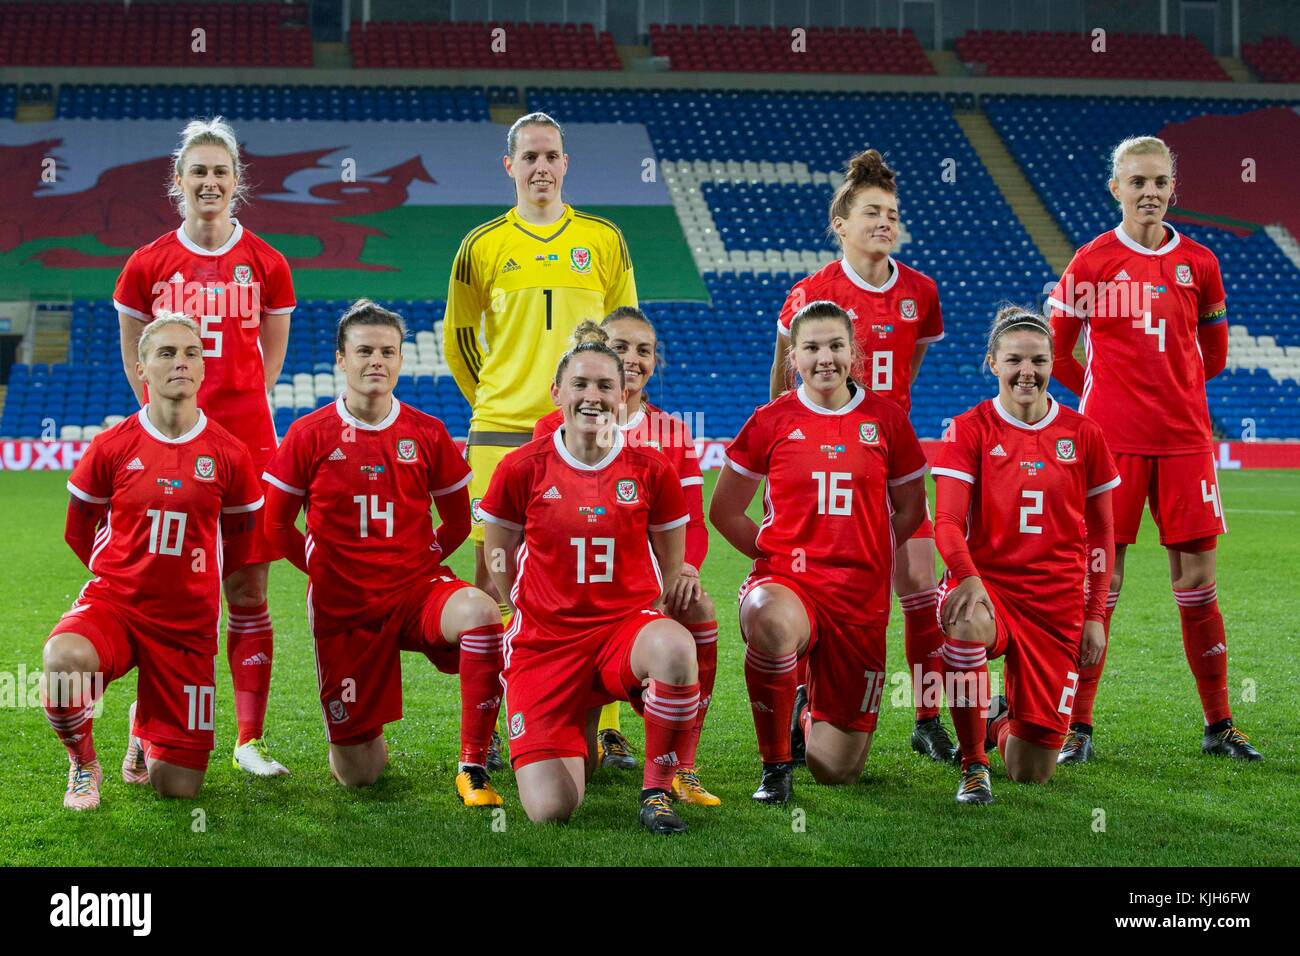 Cardiff, Wales, UK, November 24th 2017.  The Wales team picture for the FIFA Women's World Cup qualification match between Wales and Kazakhstan at Cardiff City Stadium. Credit: Mark Hawkins/Alamy Live News Stock Photo